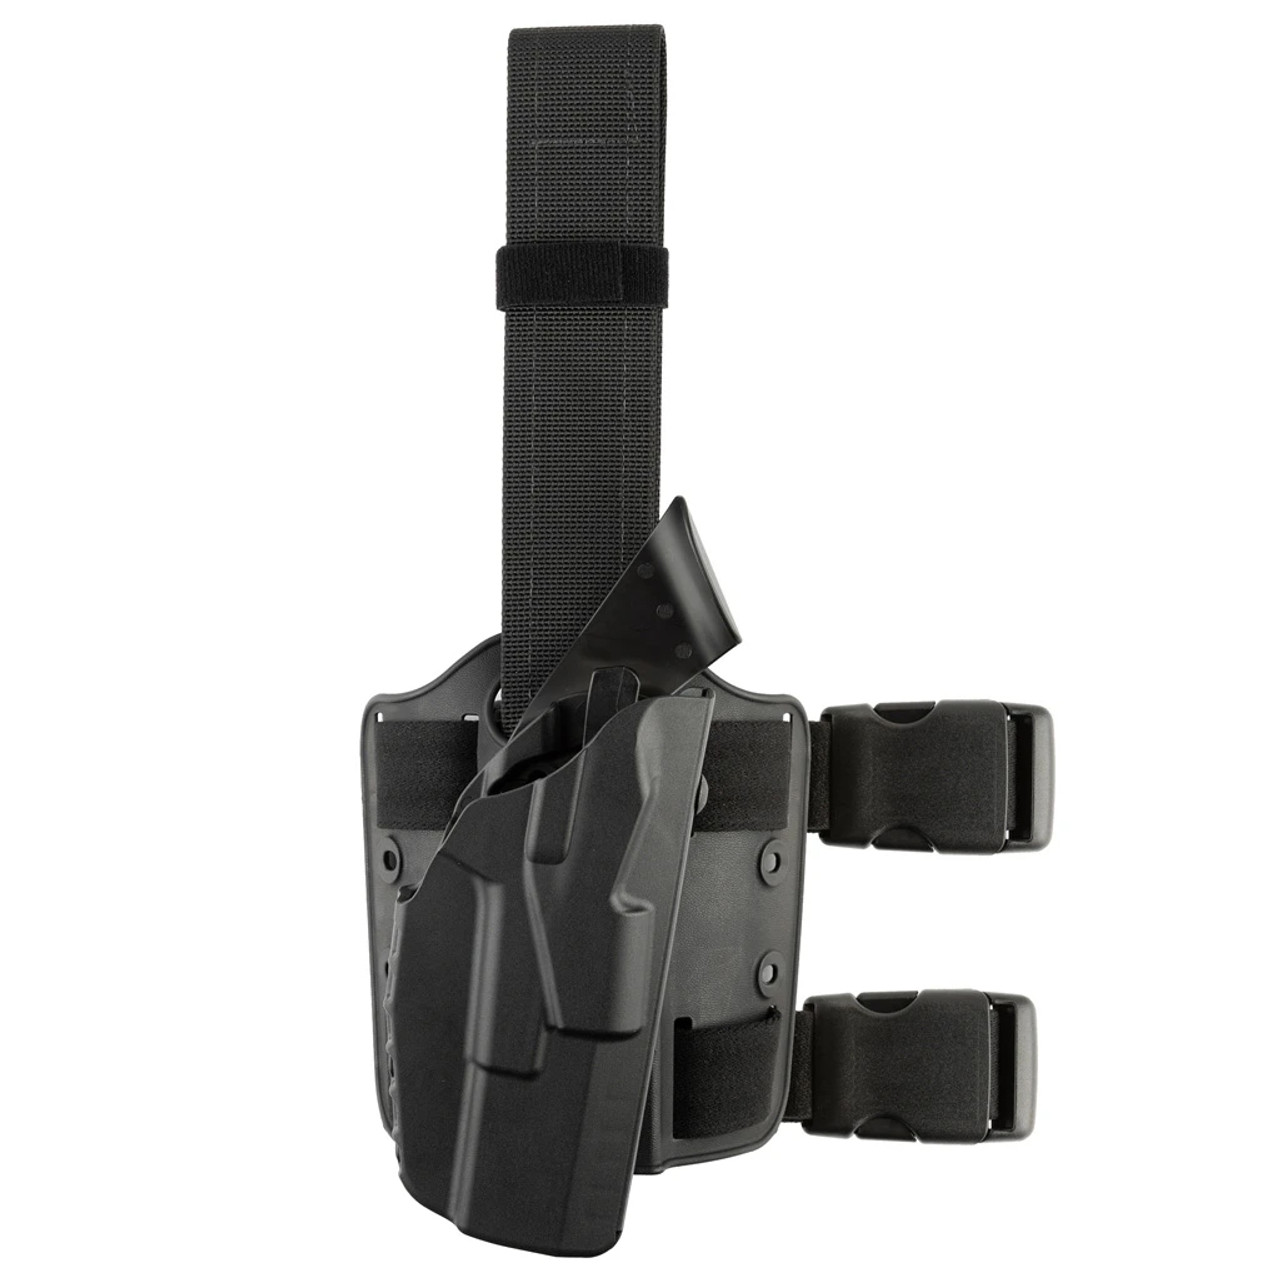 Safariland 7384 7TS ALS OMV Tactical Drop Leg Holster for Glock 19/23 with  TLR-1 or Similar Light MOLLE Right Hand SafariSeven Black [FC-781602135191]  - Cheaper Than Dirt